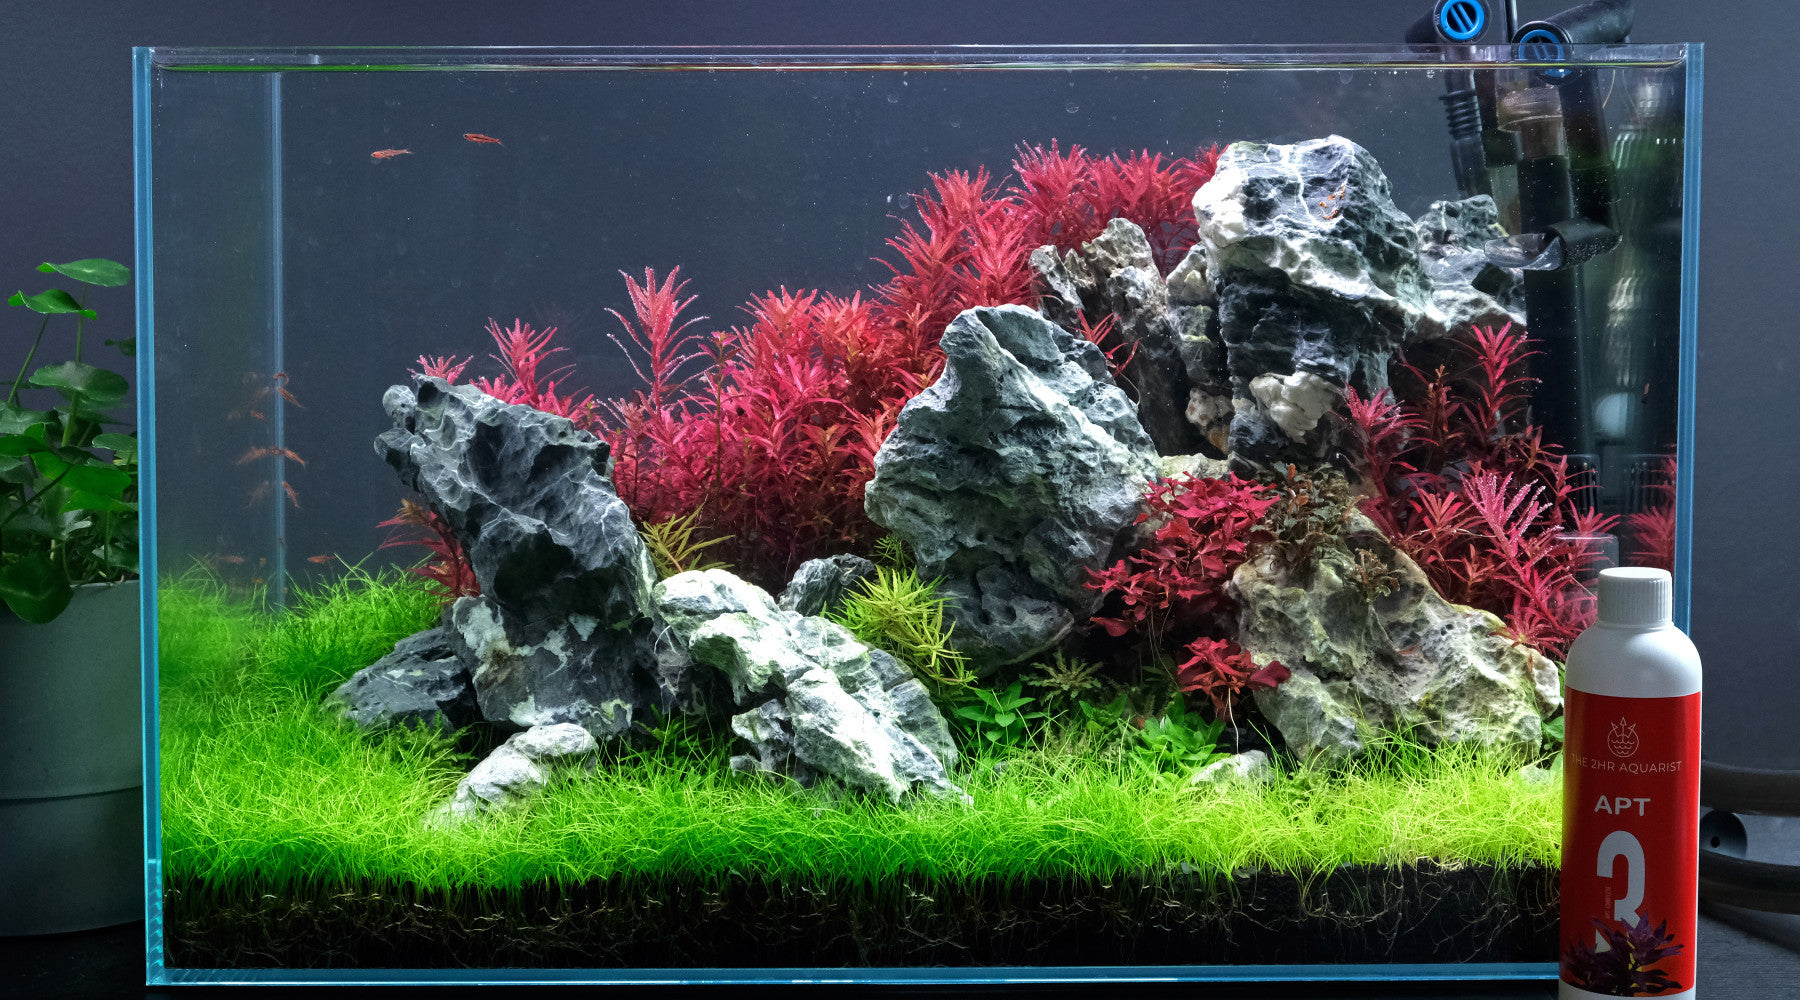 What is a good level of GH in a planted aquarium?